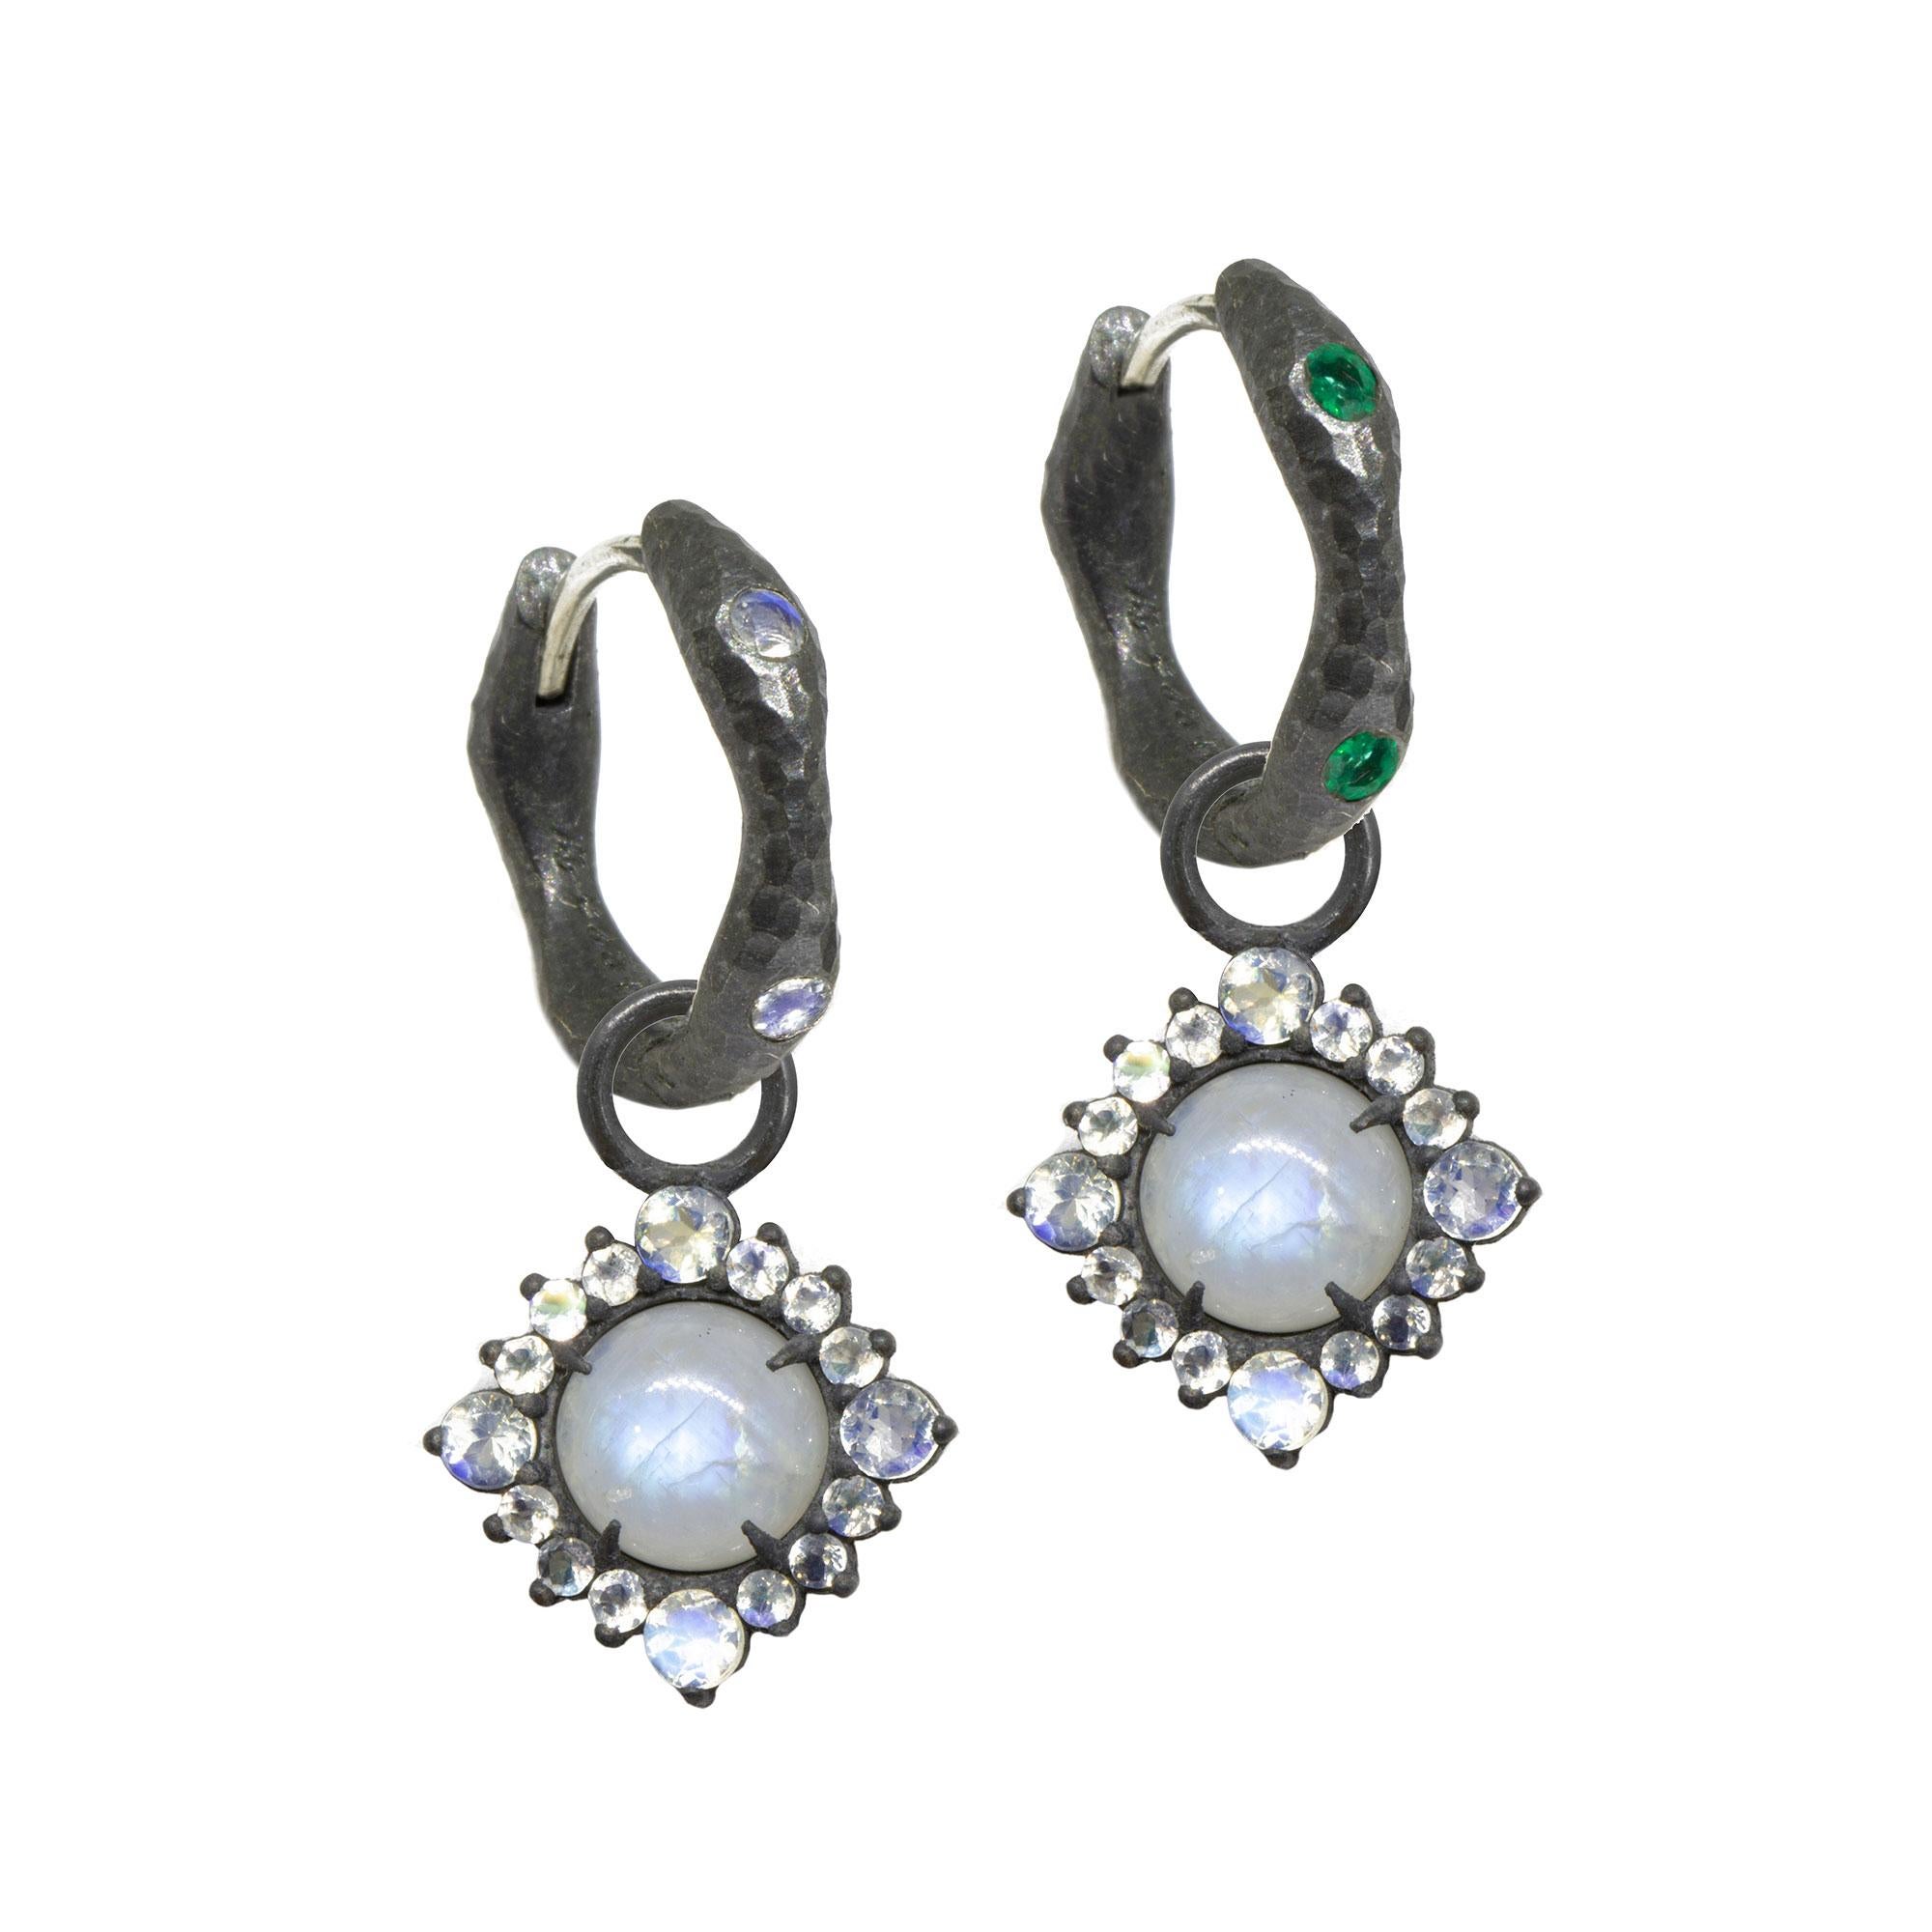  Our moonstone-accented Grace Silver Earring Charms are rimmed in black oxidized silver, with a vivid moonstone gemstone at the center. Pair them with an hoop, mix them with any style, the Grace Silver Earring Charms made a great addition. 

Nina